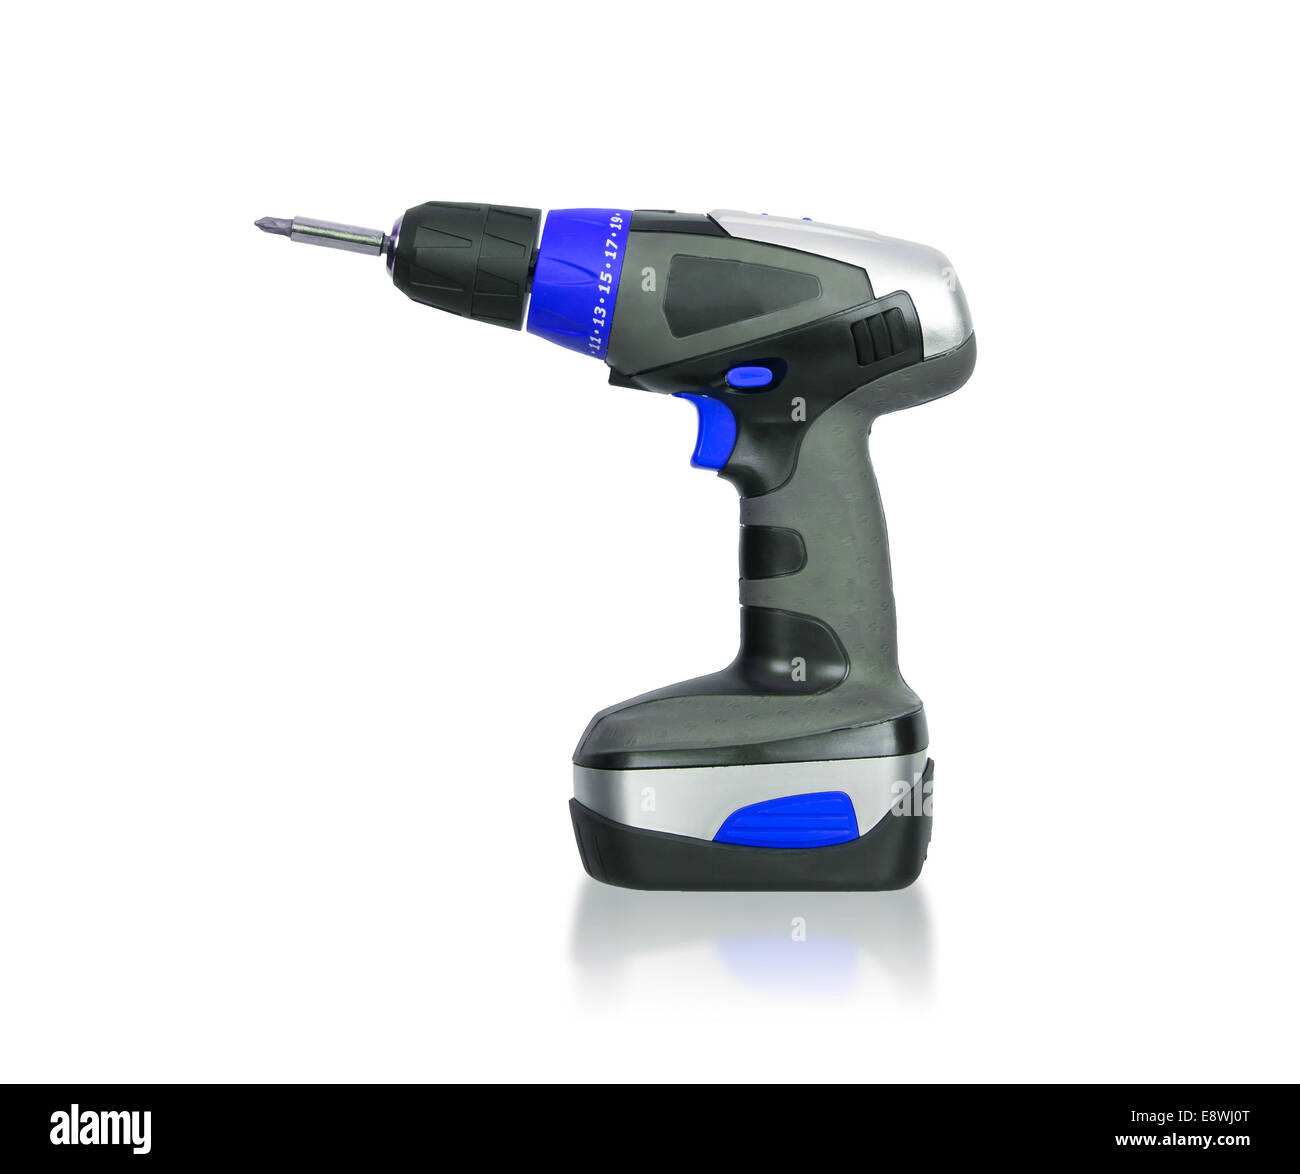 https://c8.alamy.com/comp/E8WJ0T/cordless-screwdriver-or-power-drill-isolated-on-a-white-background-E8WJ0T.jpg